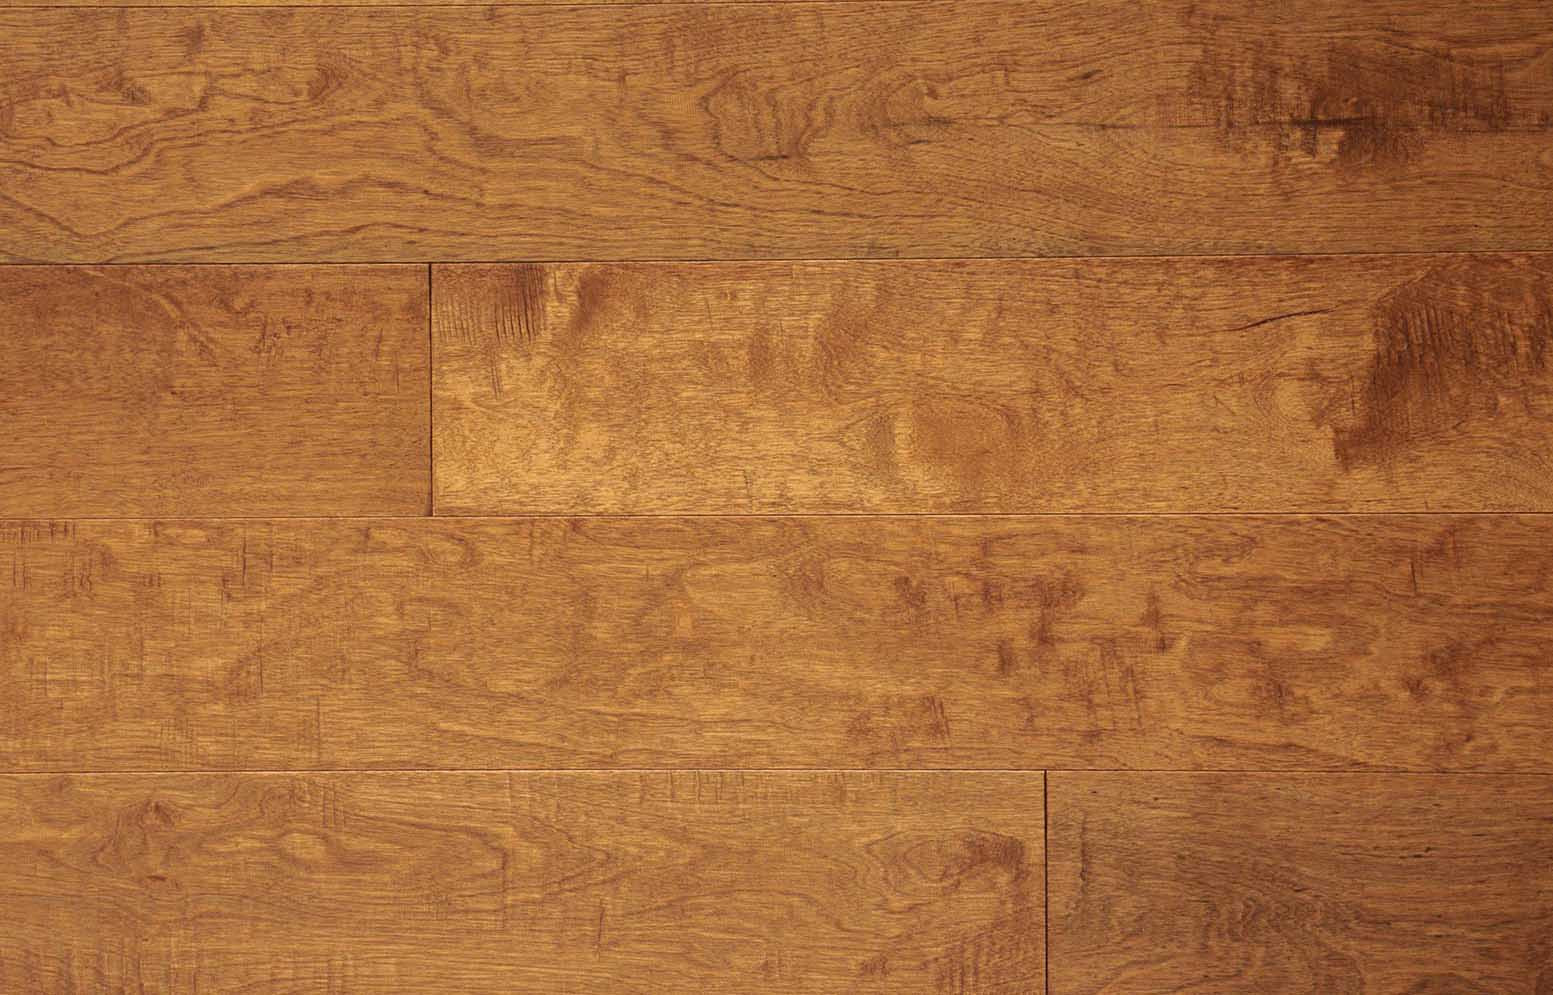 27 Lovely 5 Inch Wide Hickory Hardwood Flooring 2024 free download 5 inch wide hickory hardwood flooring of hardwood flooring for engineered 5 inch wide moldings prefinished unfinished prefinished unfinished copper hickory